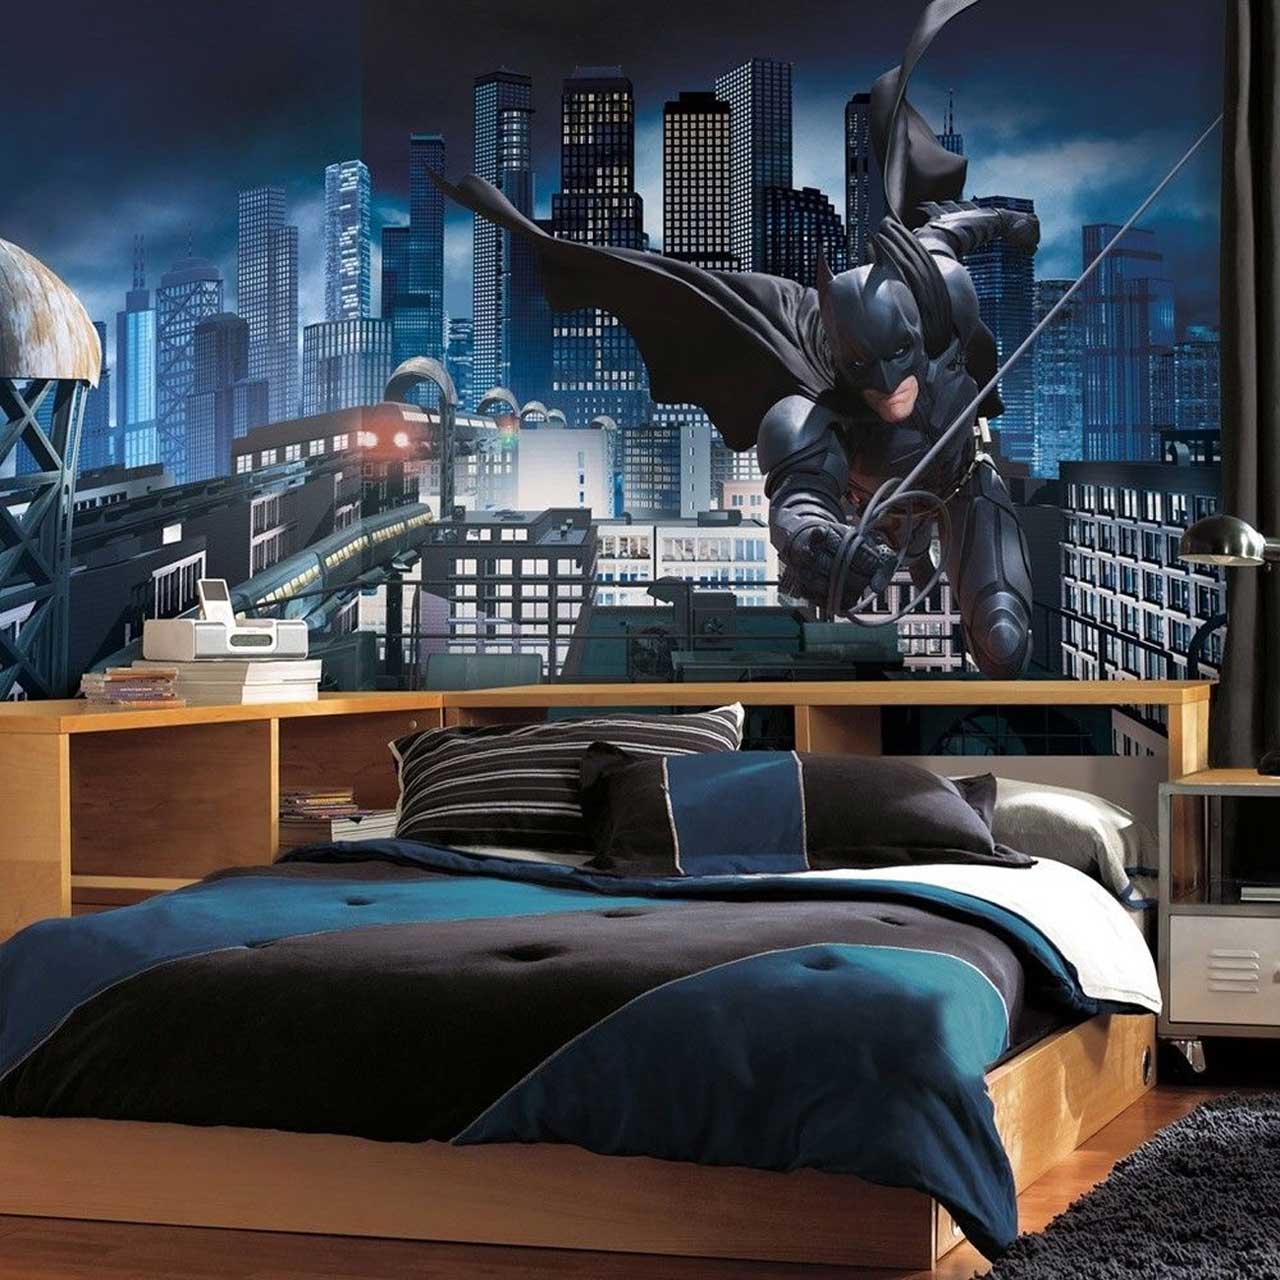 Awesome Superheroes Kids Room Decor For Boys Designs Ideas With Stylish Wood Bed Kids Room Design Also Cool Batman Wall Art Canvas Kids Room Ideas Plus Interesting Bookcase Ideas